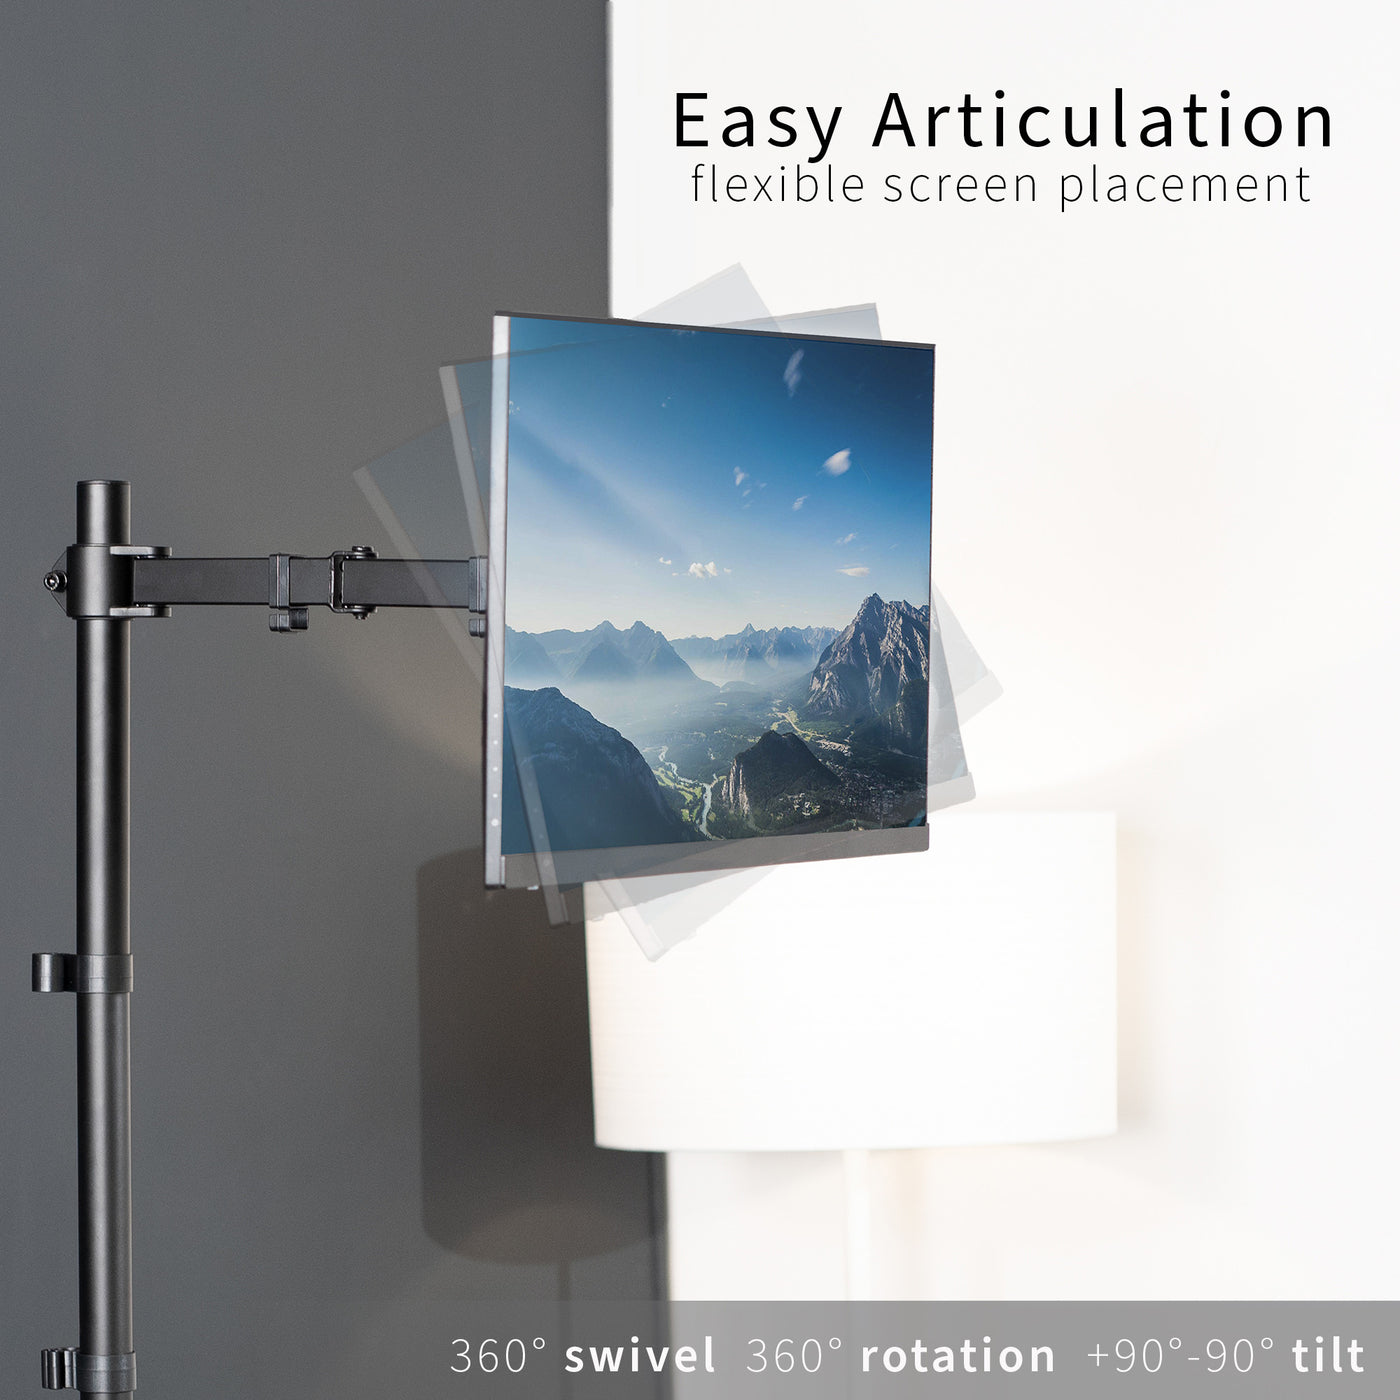 Extra tall desk mount for single monitor provides sit or stand application for the user as well as flexible viewing angles.